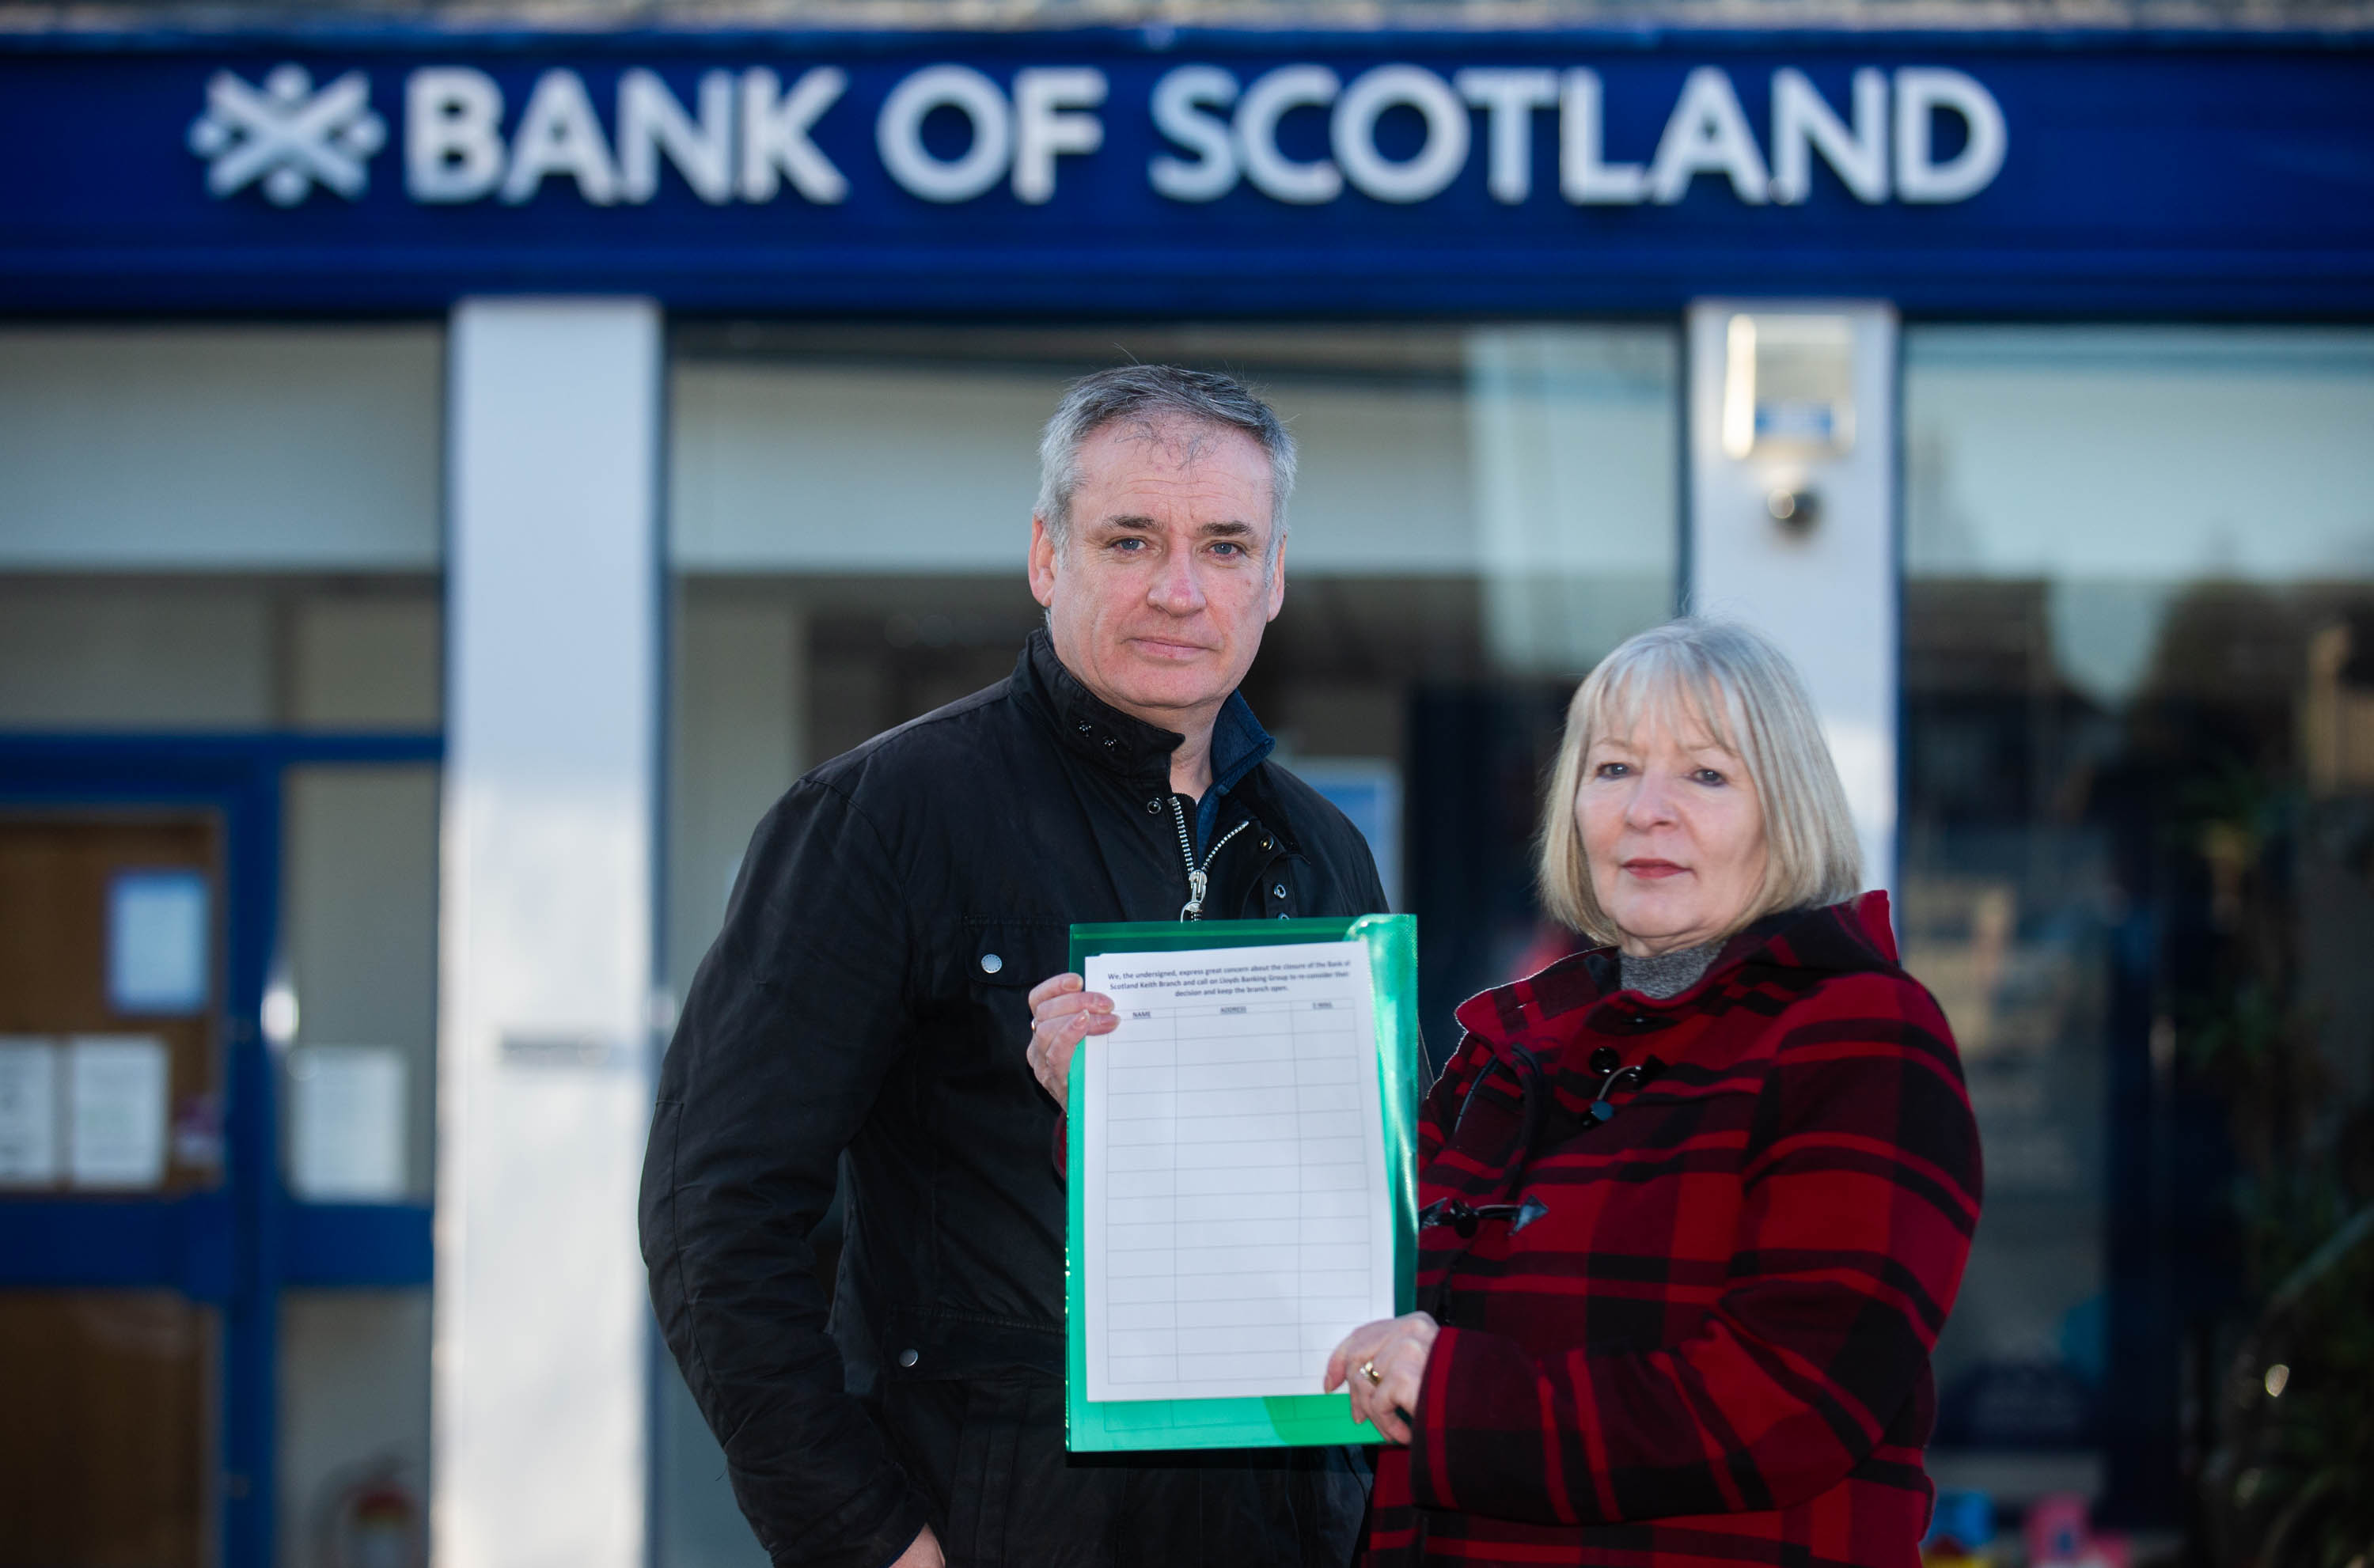 Moray MSP Richard Lochhead and Keith and Cullen councillor Theresa Coull have launched a petition to try and save the Bank of Scotland branch in Keith.